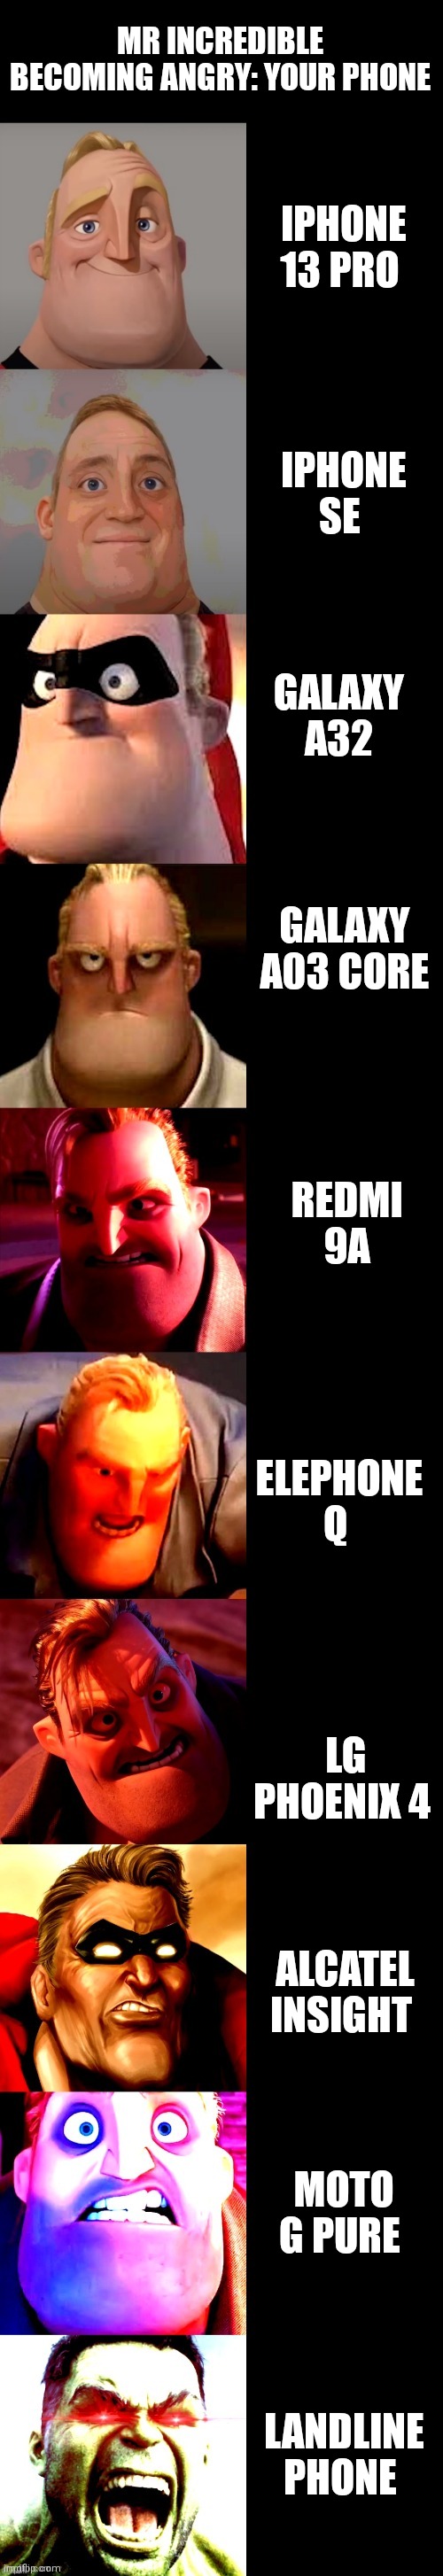 Mr incredible becoming Angry your phone is | MR INCREDIBLE BECOMING ANGRY: YOUR PHONE; IPHONE 13 PRO; IPHONE SE; GALAXY A32; GALAXY A03 CORE; REDMI 9A; ELEPHONE Q; LG PHOENIX 4; ALCATEL INSIGHT; MOTO G PURE; LANDLINE PHONE | image tagged in mr incredible becoming angry | made w/ Imgflip meme maker